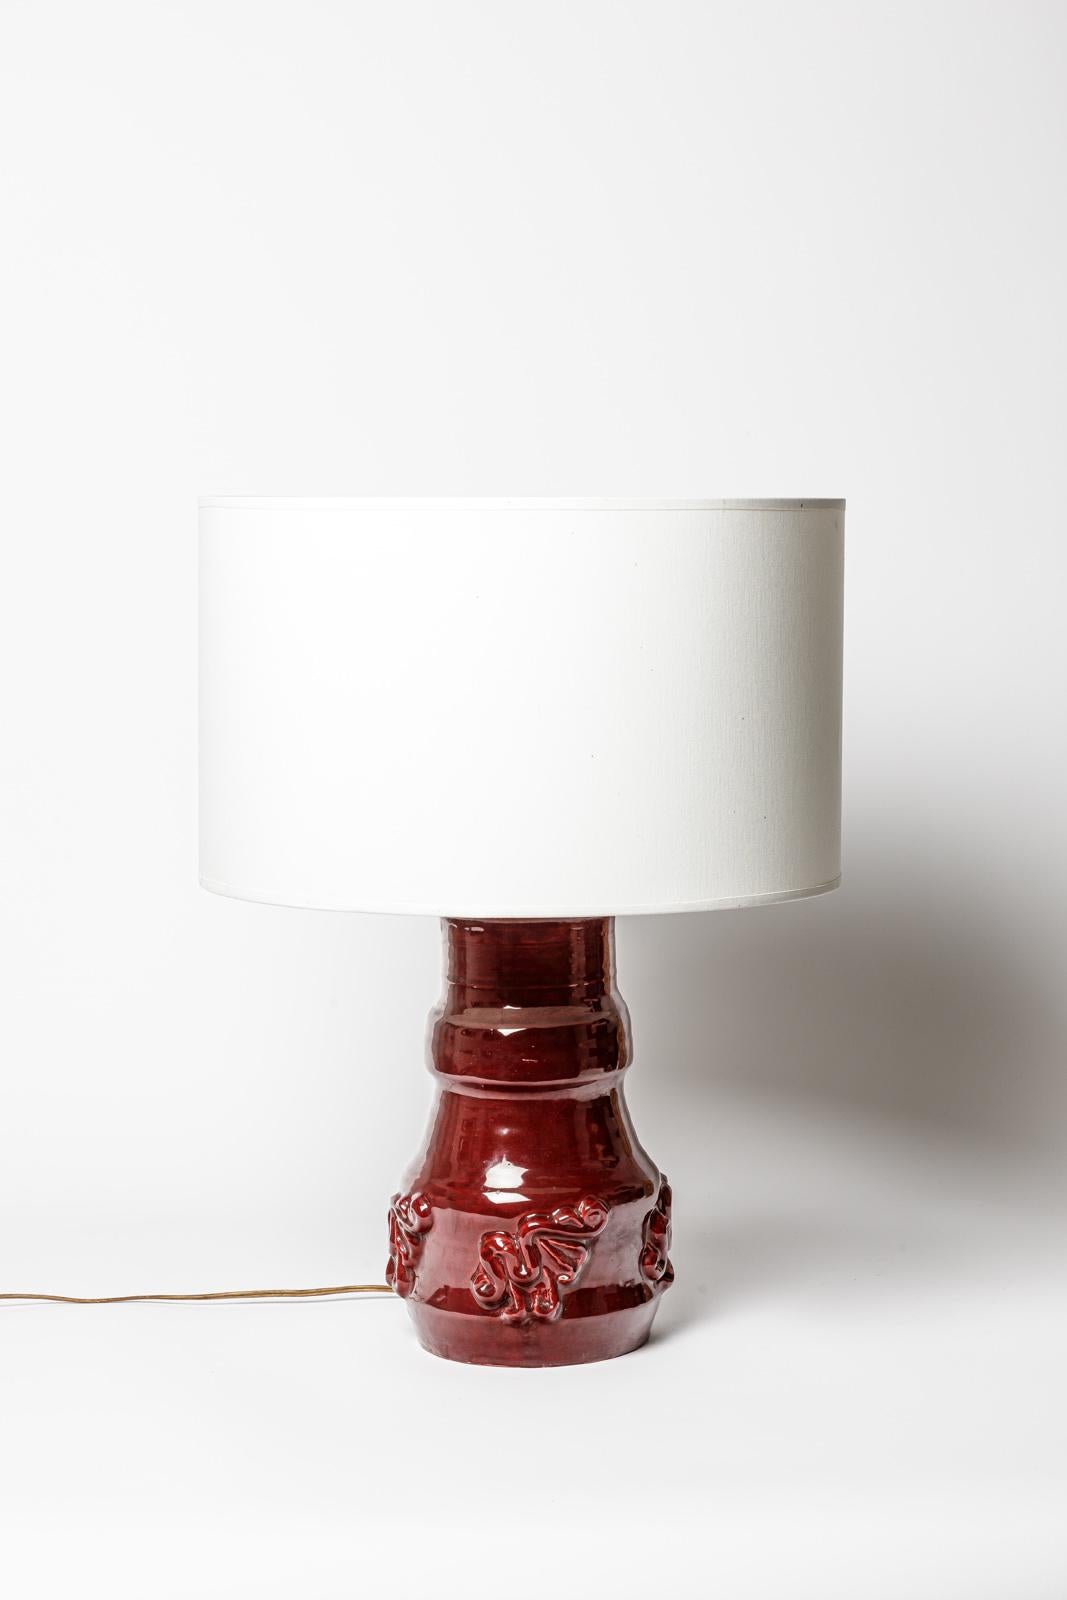 20th Century Circa 1950 large red ceramic table lamp by Jean Austruy 20th century design For Sale